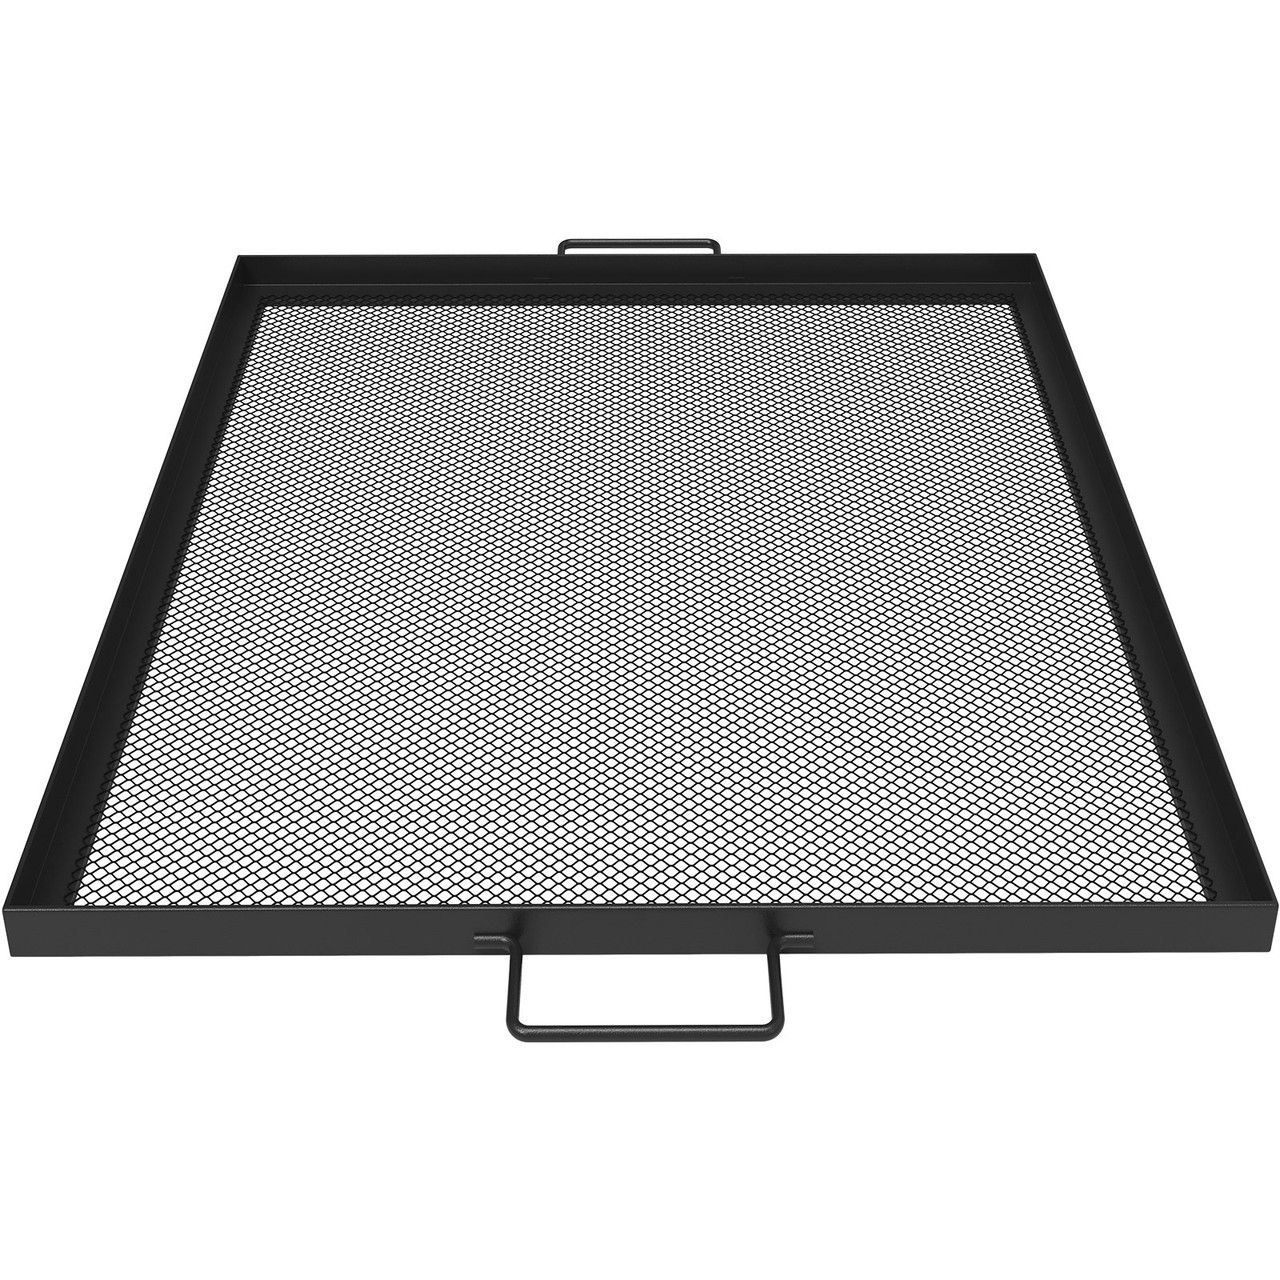 VEVOR Square Fire Pit Grate, 24 x 24 inch Fire Pit Grill Grate, X-Marks Square Grill Grate, Black Steel Fire Grate, Fire Pit Cooking Grate with Handles, Fire Grill Grate for Fire Pit, Campfire